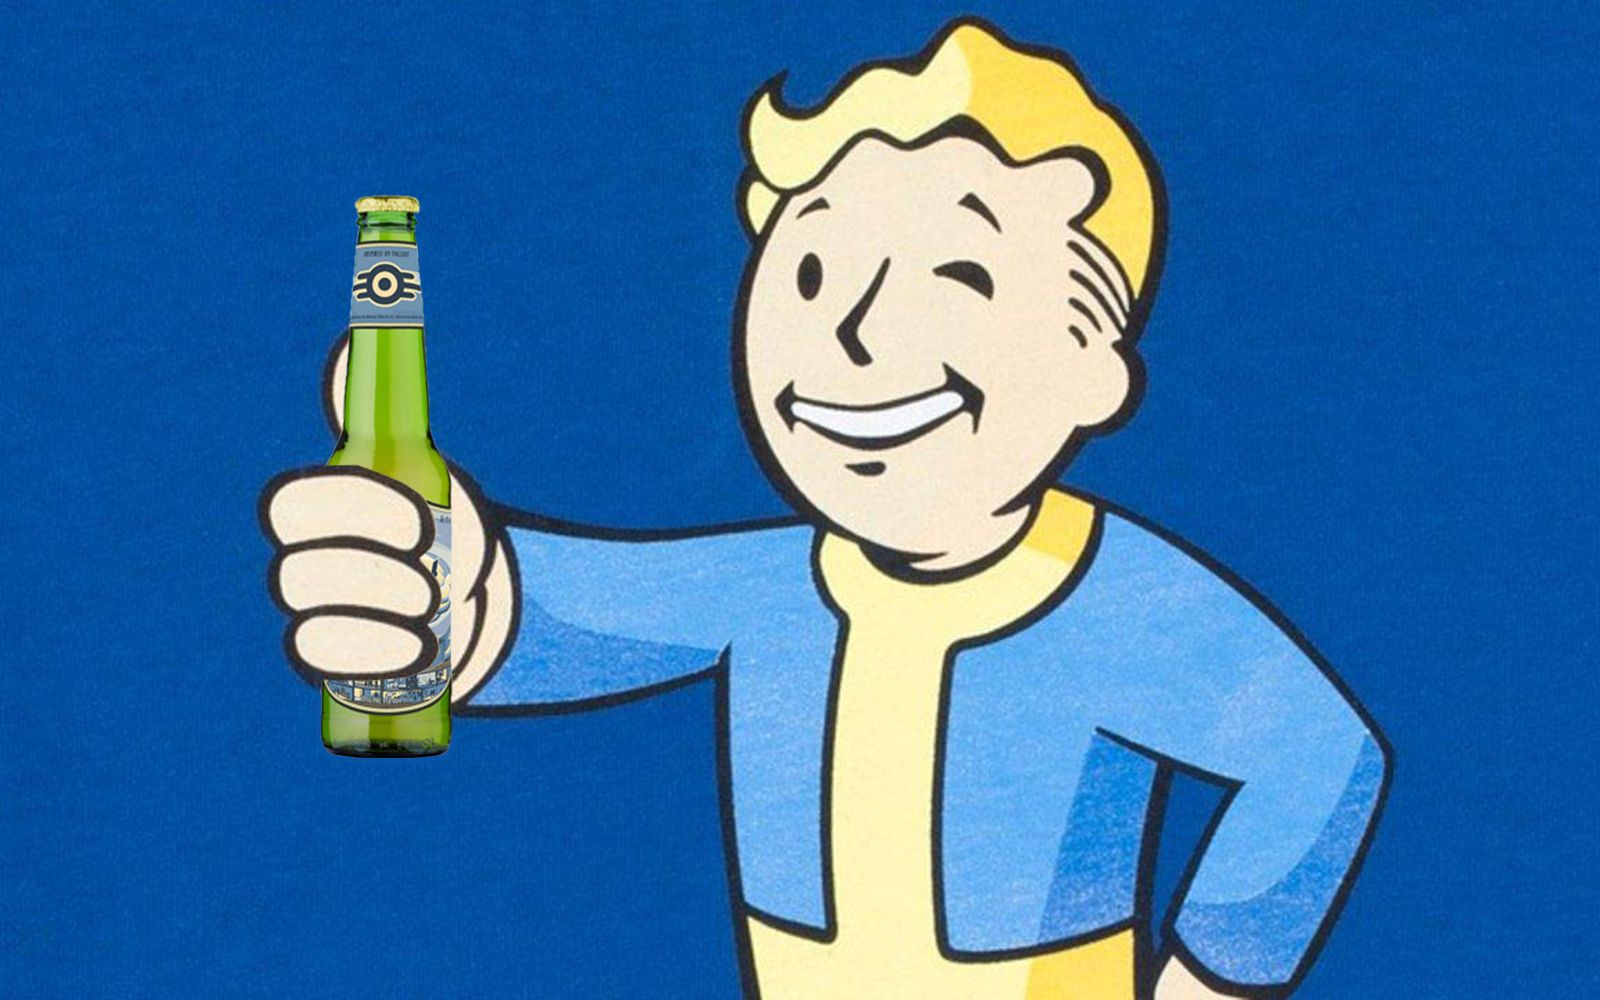 official fallout beer you can drink while playing fallout 4 arrives just in time image 1